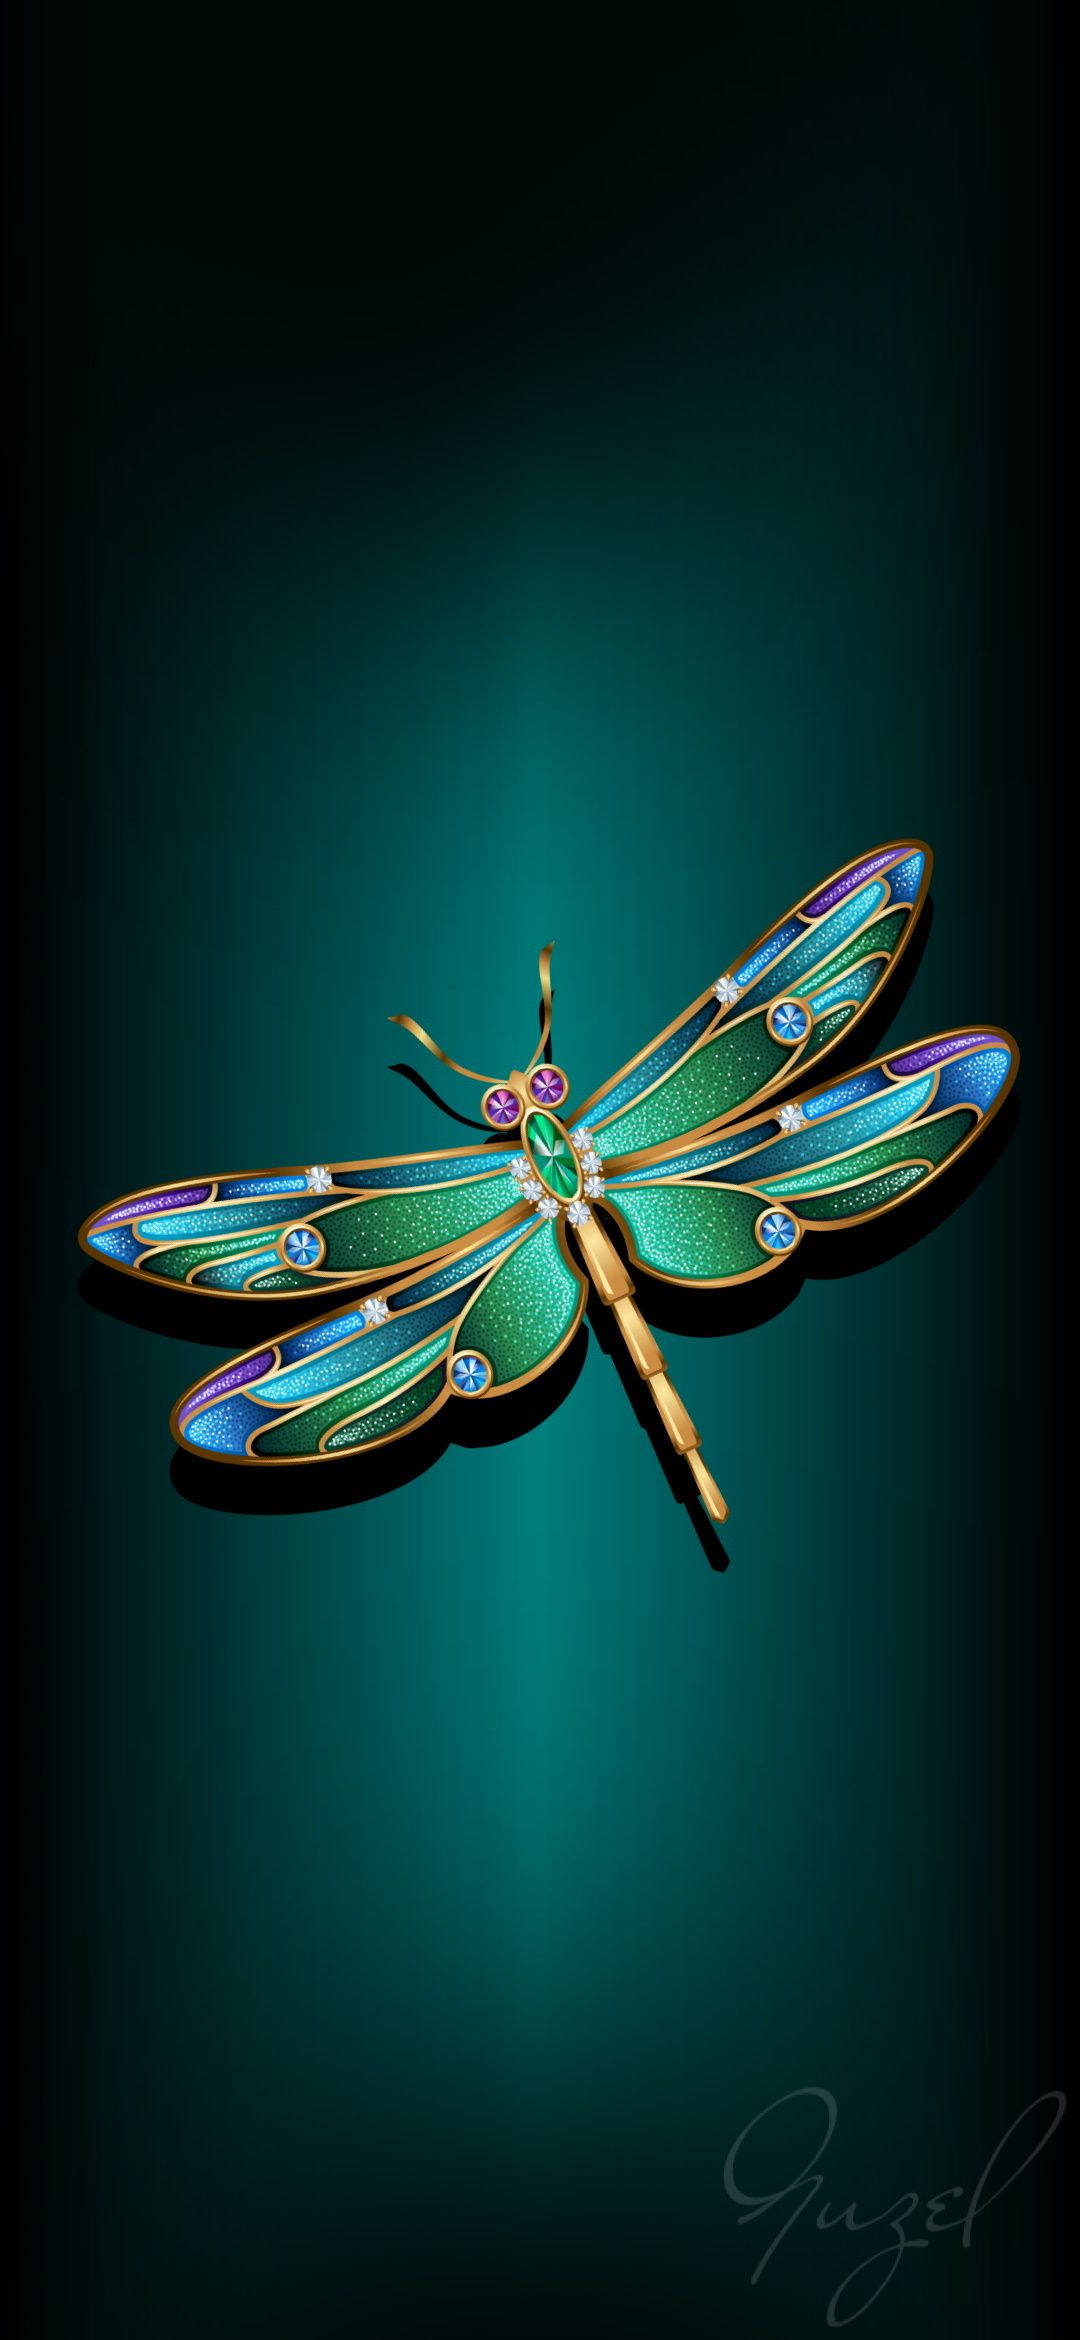 Details more than 66 wallpaper with dragonflies best - in.cdgdbentre